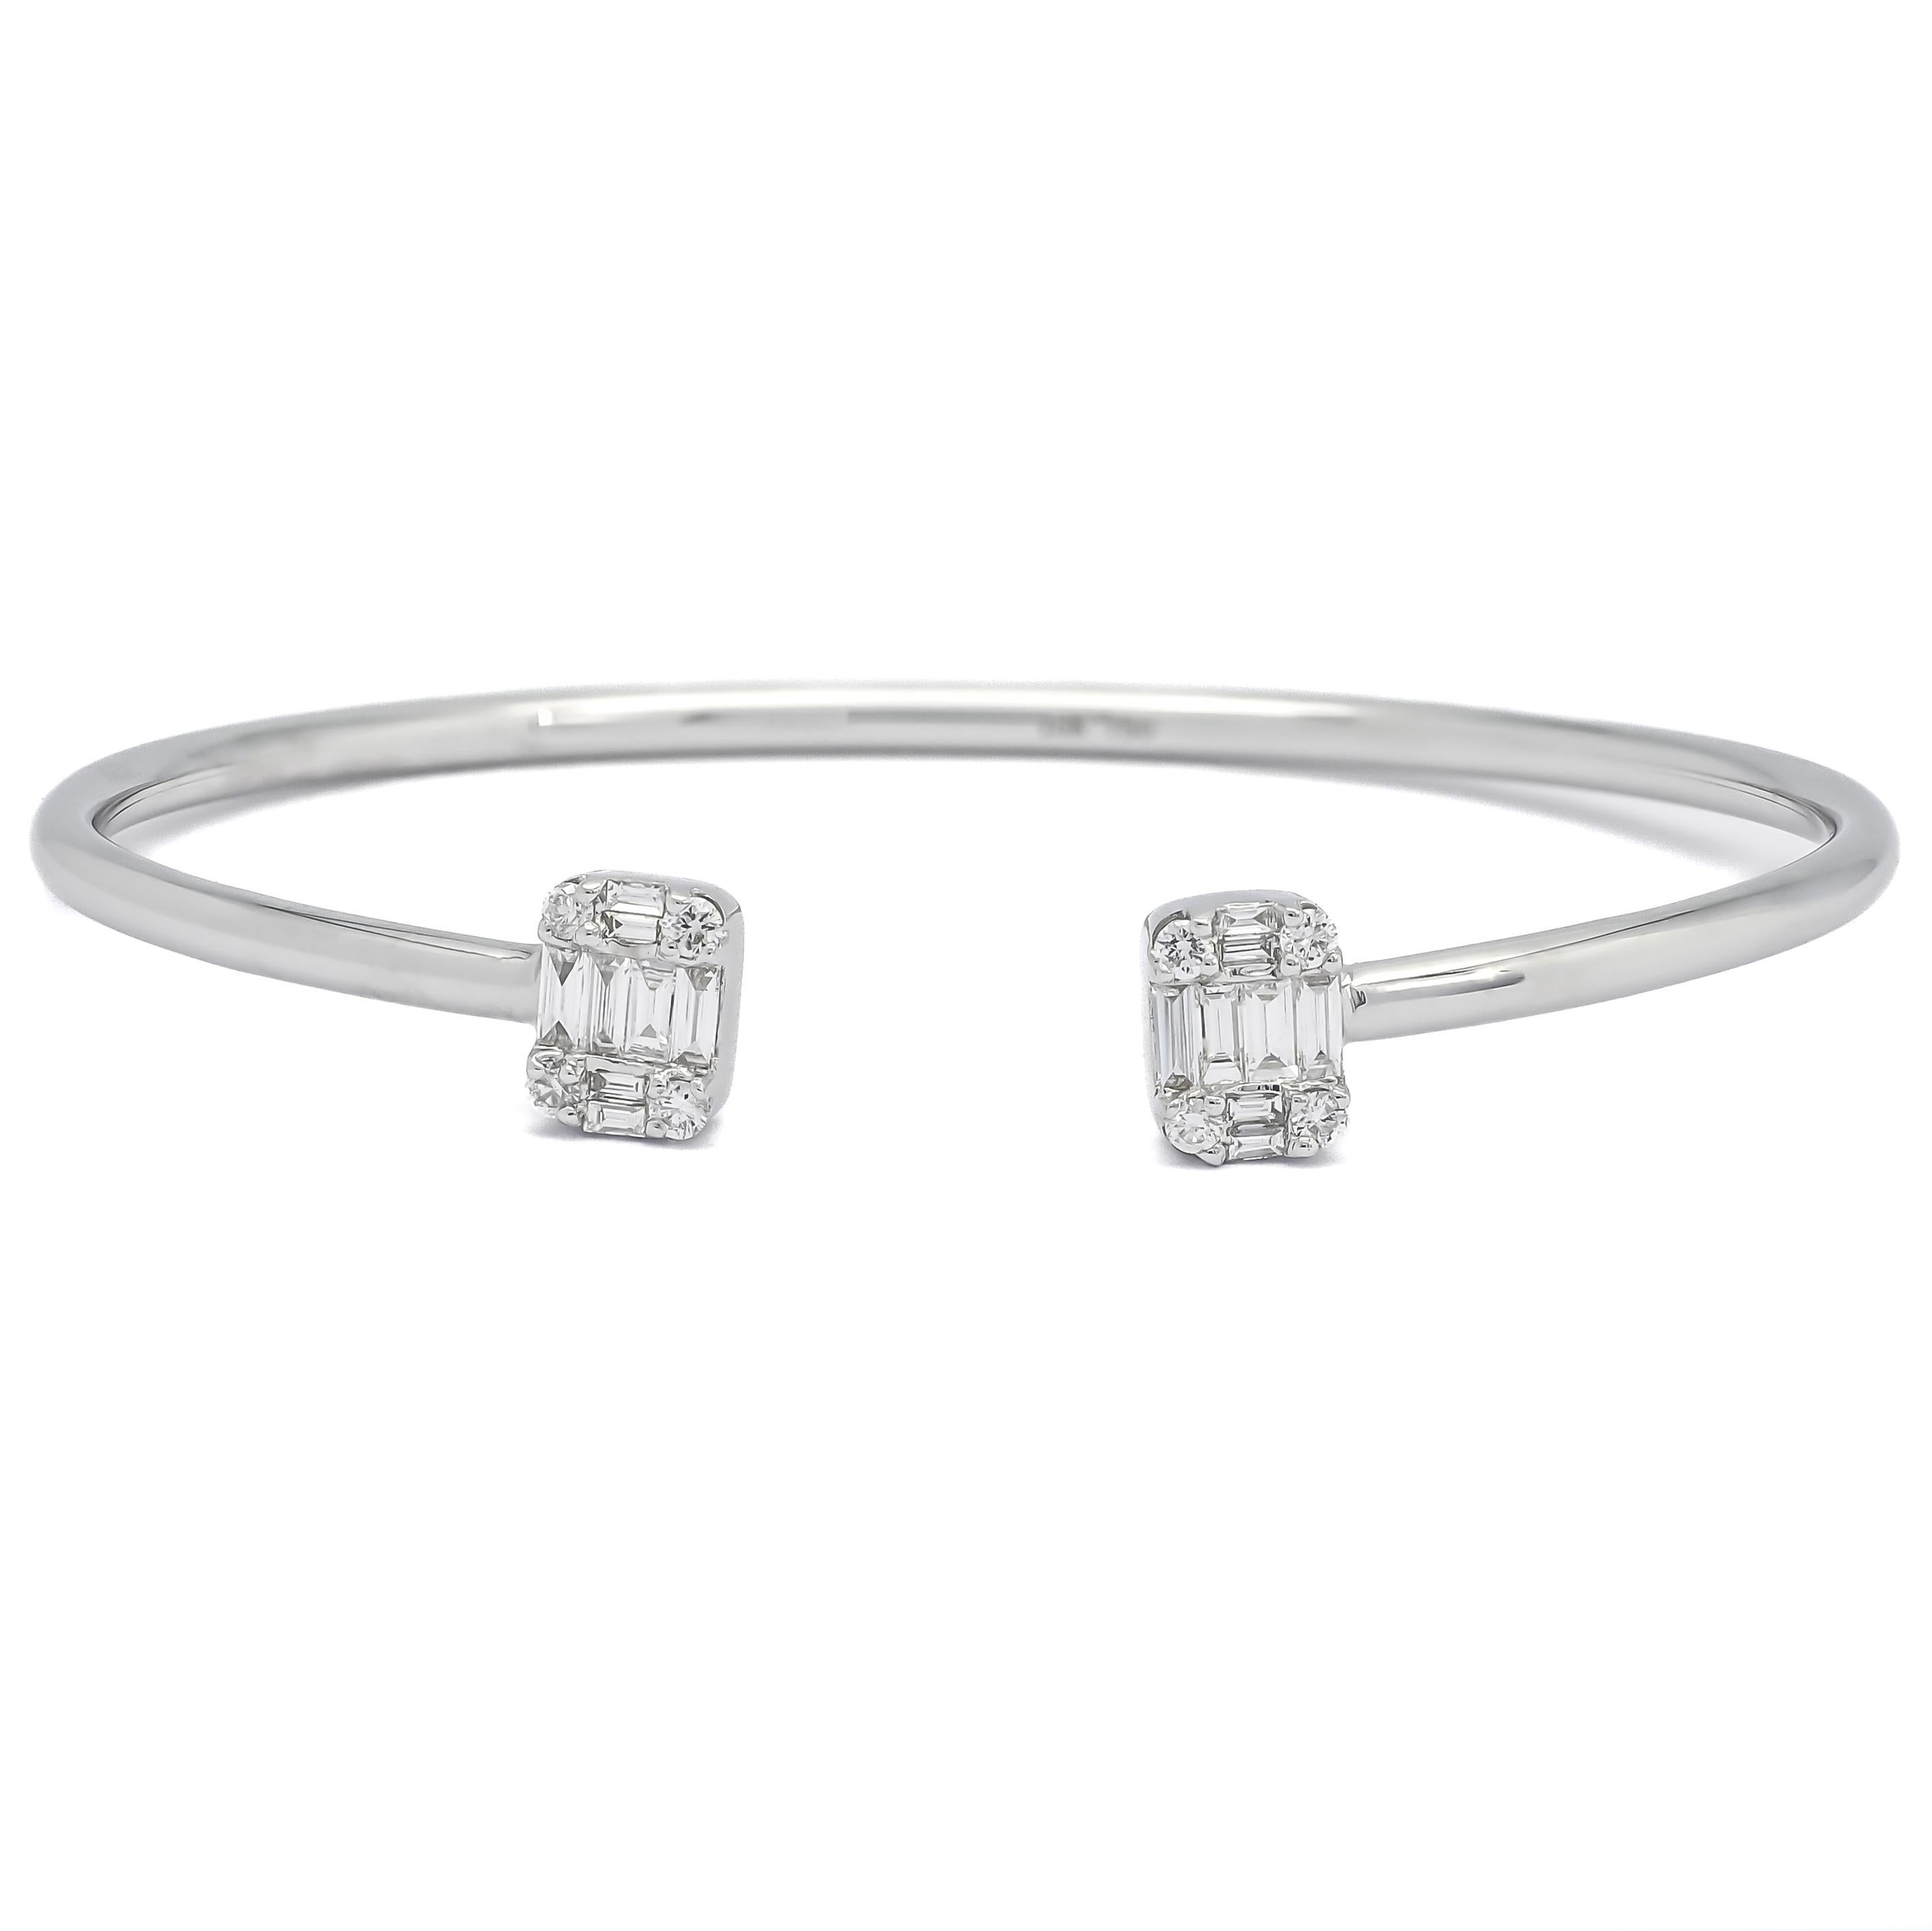 Step into a world of unparalleled elegance and luxury with this exquisite bangle bracelet, adorned with a captivating square cluster of tapered baguette and round-shape diamonds. Crafted in 18KT gold, this bracelet is a masterpiece of fine jewelry